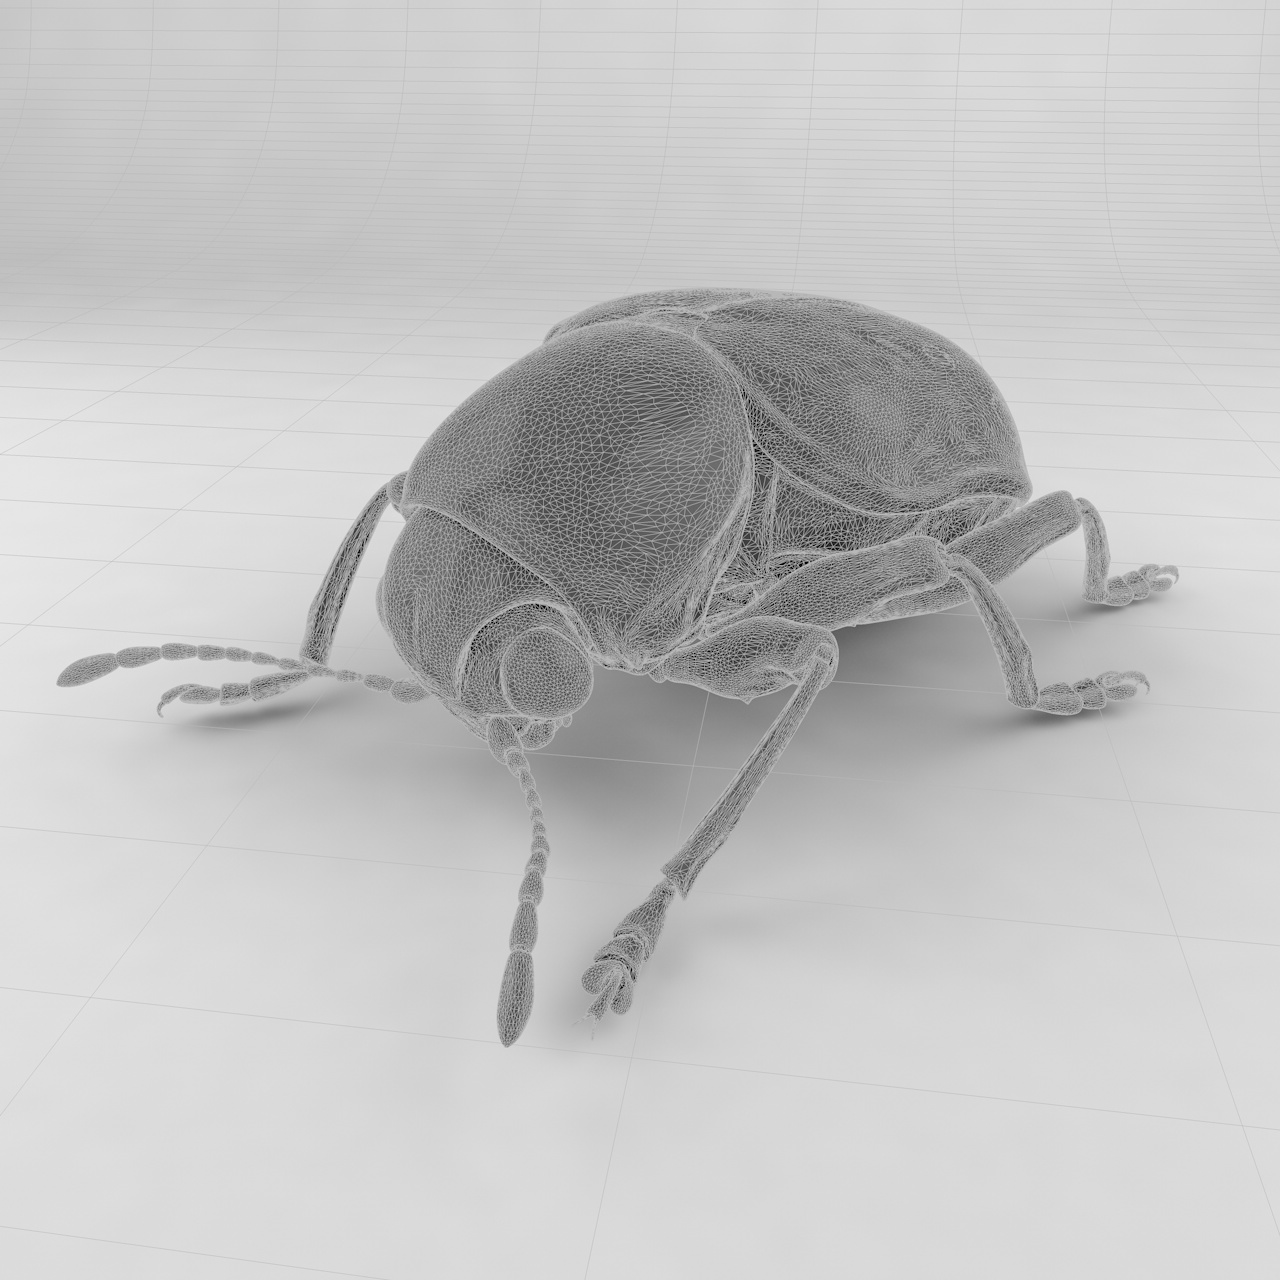 Scelodonta lewisii insect beetles 3d model